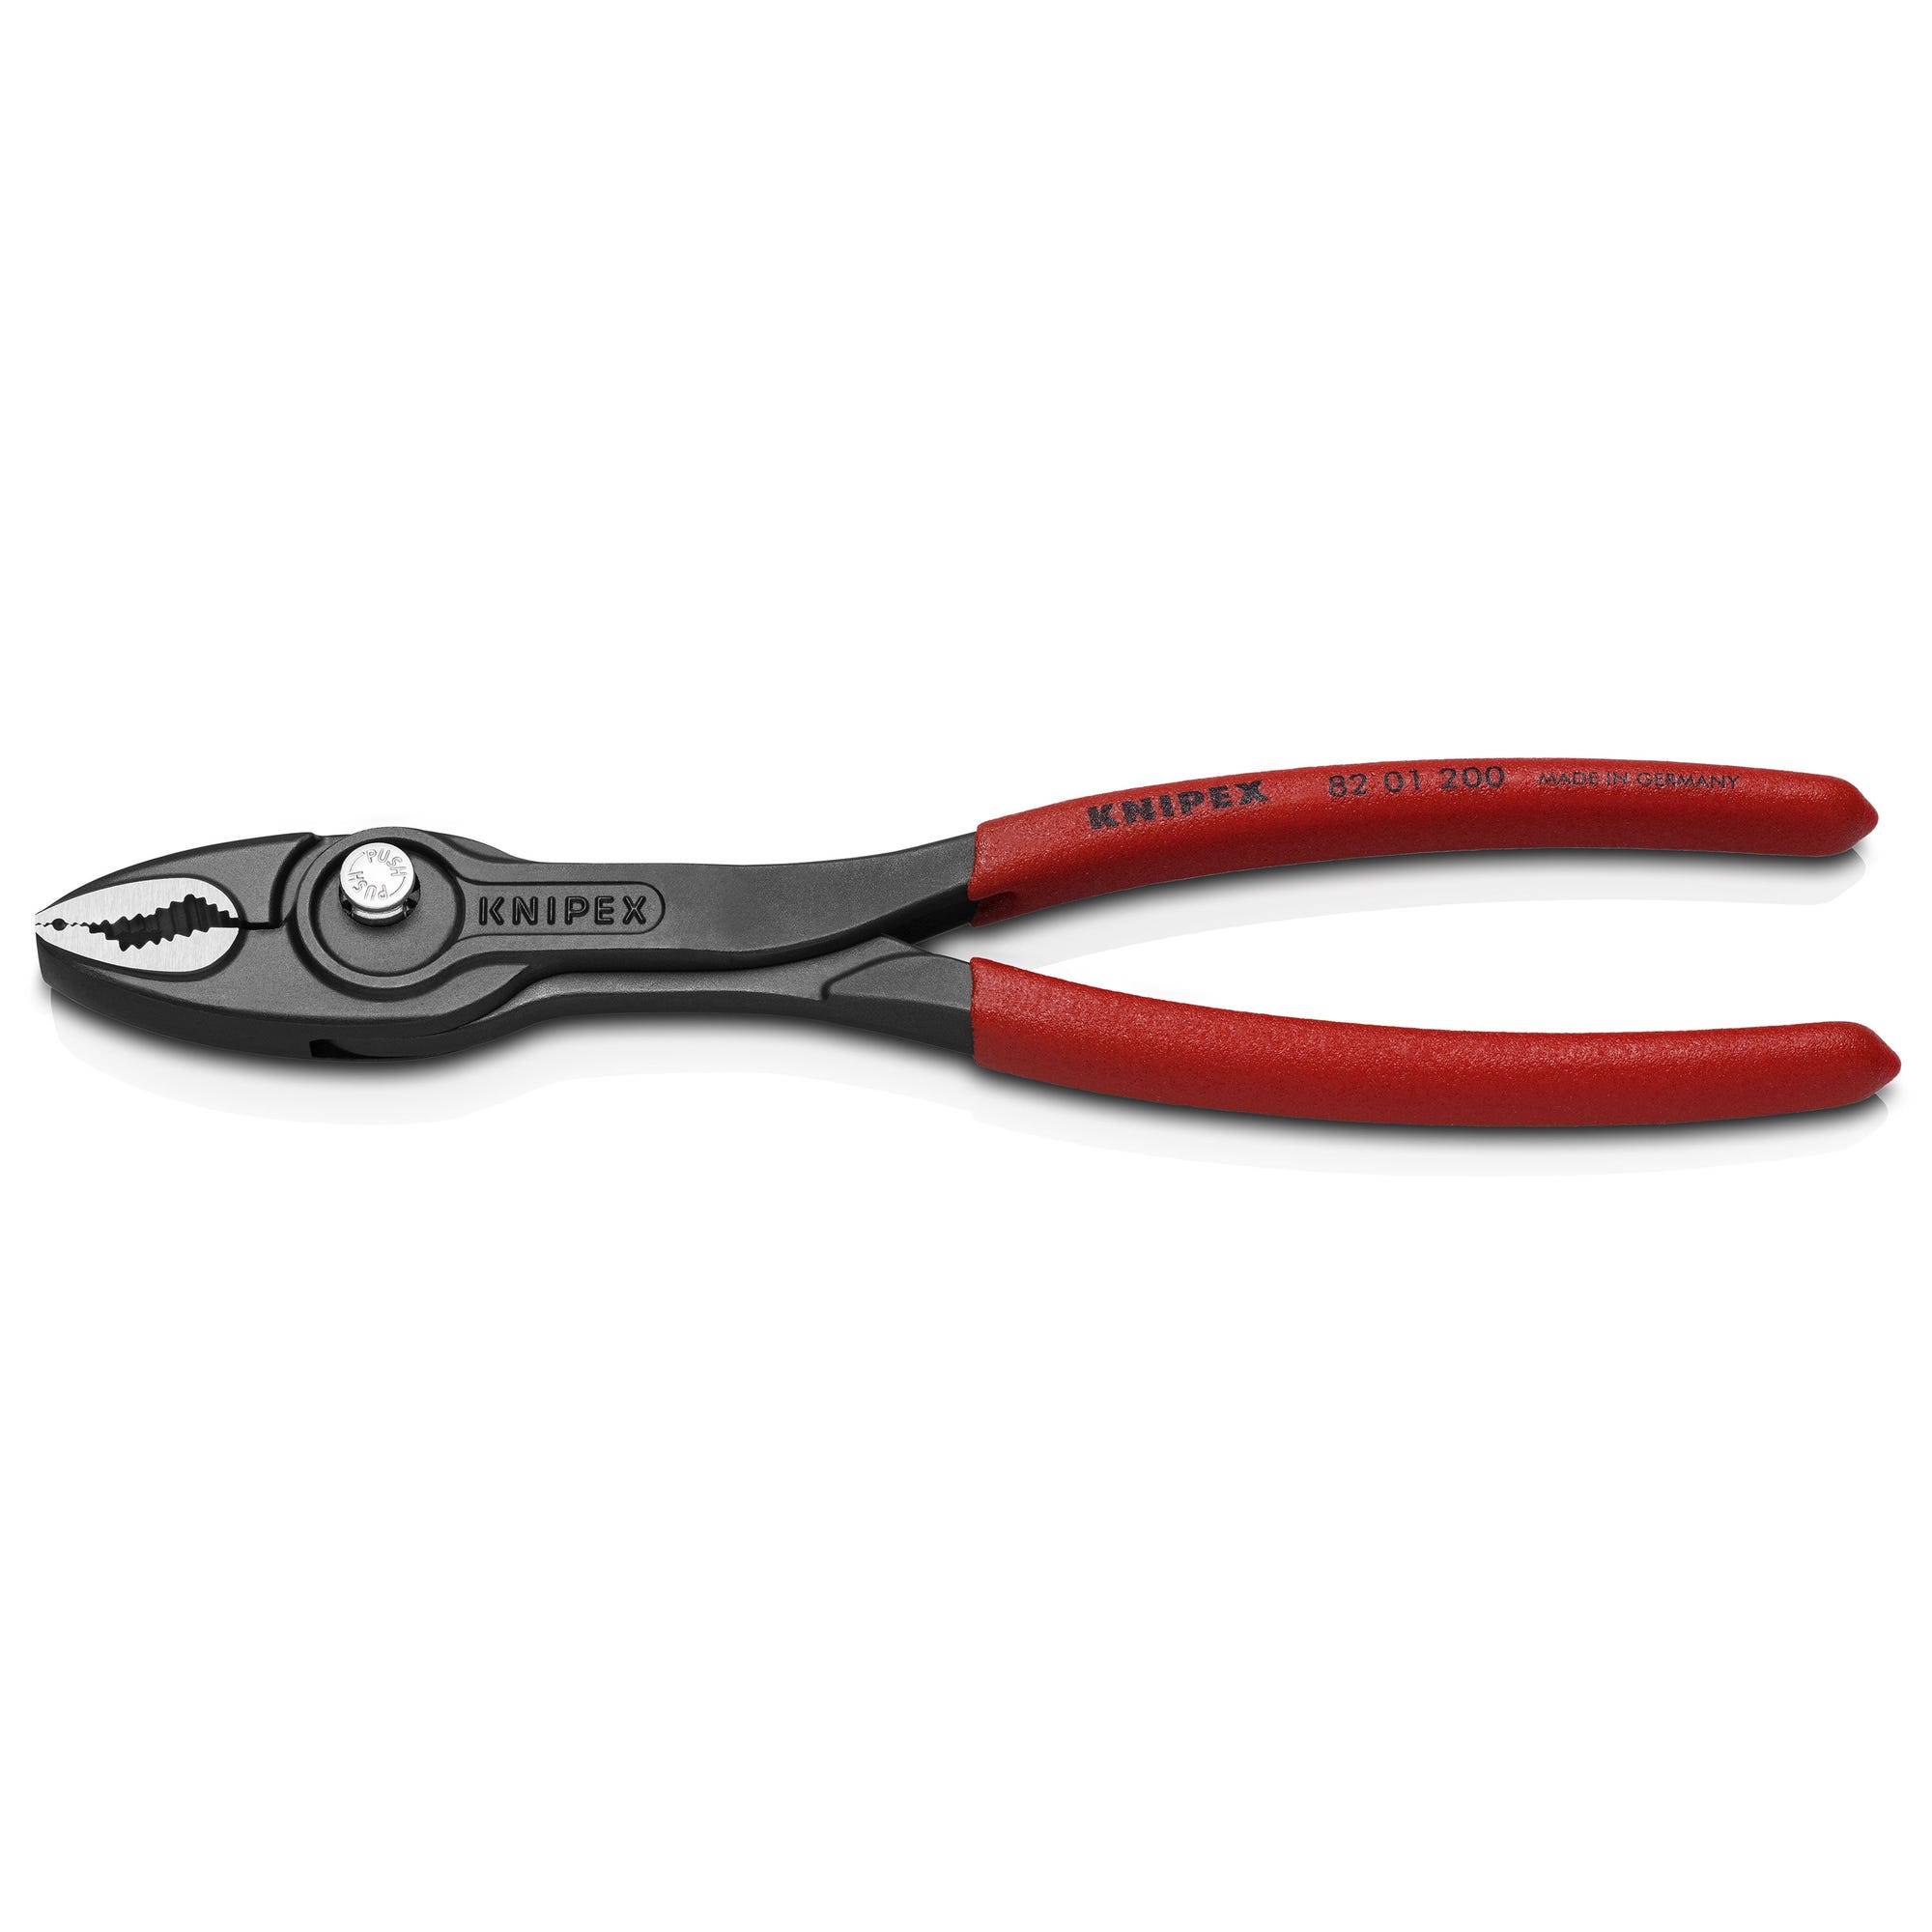 Knipex 82 01 200 - Alicate agarre frontal ajustable Knipex TwinGrip 200 mm. con mangos PVC 0